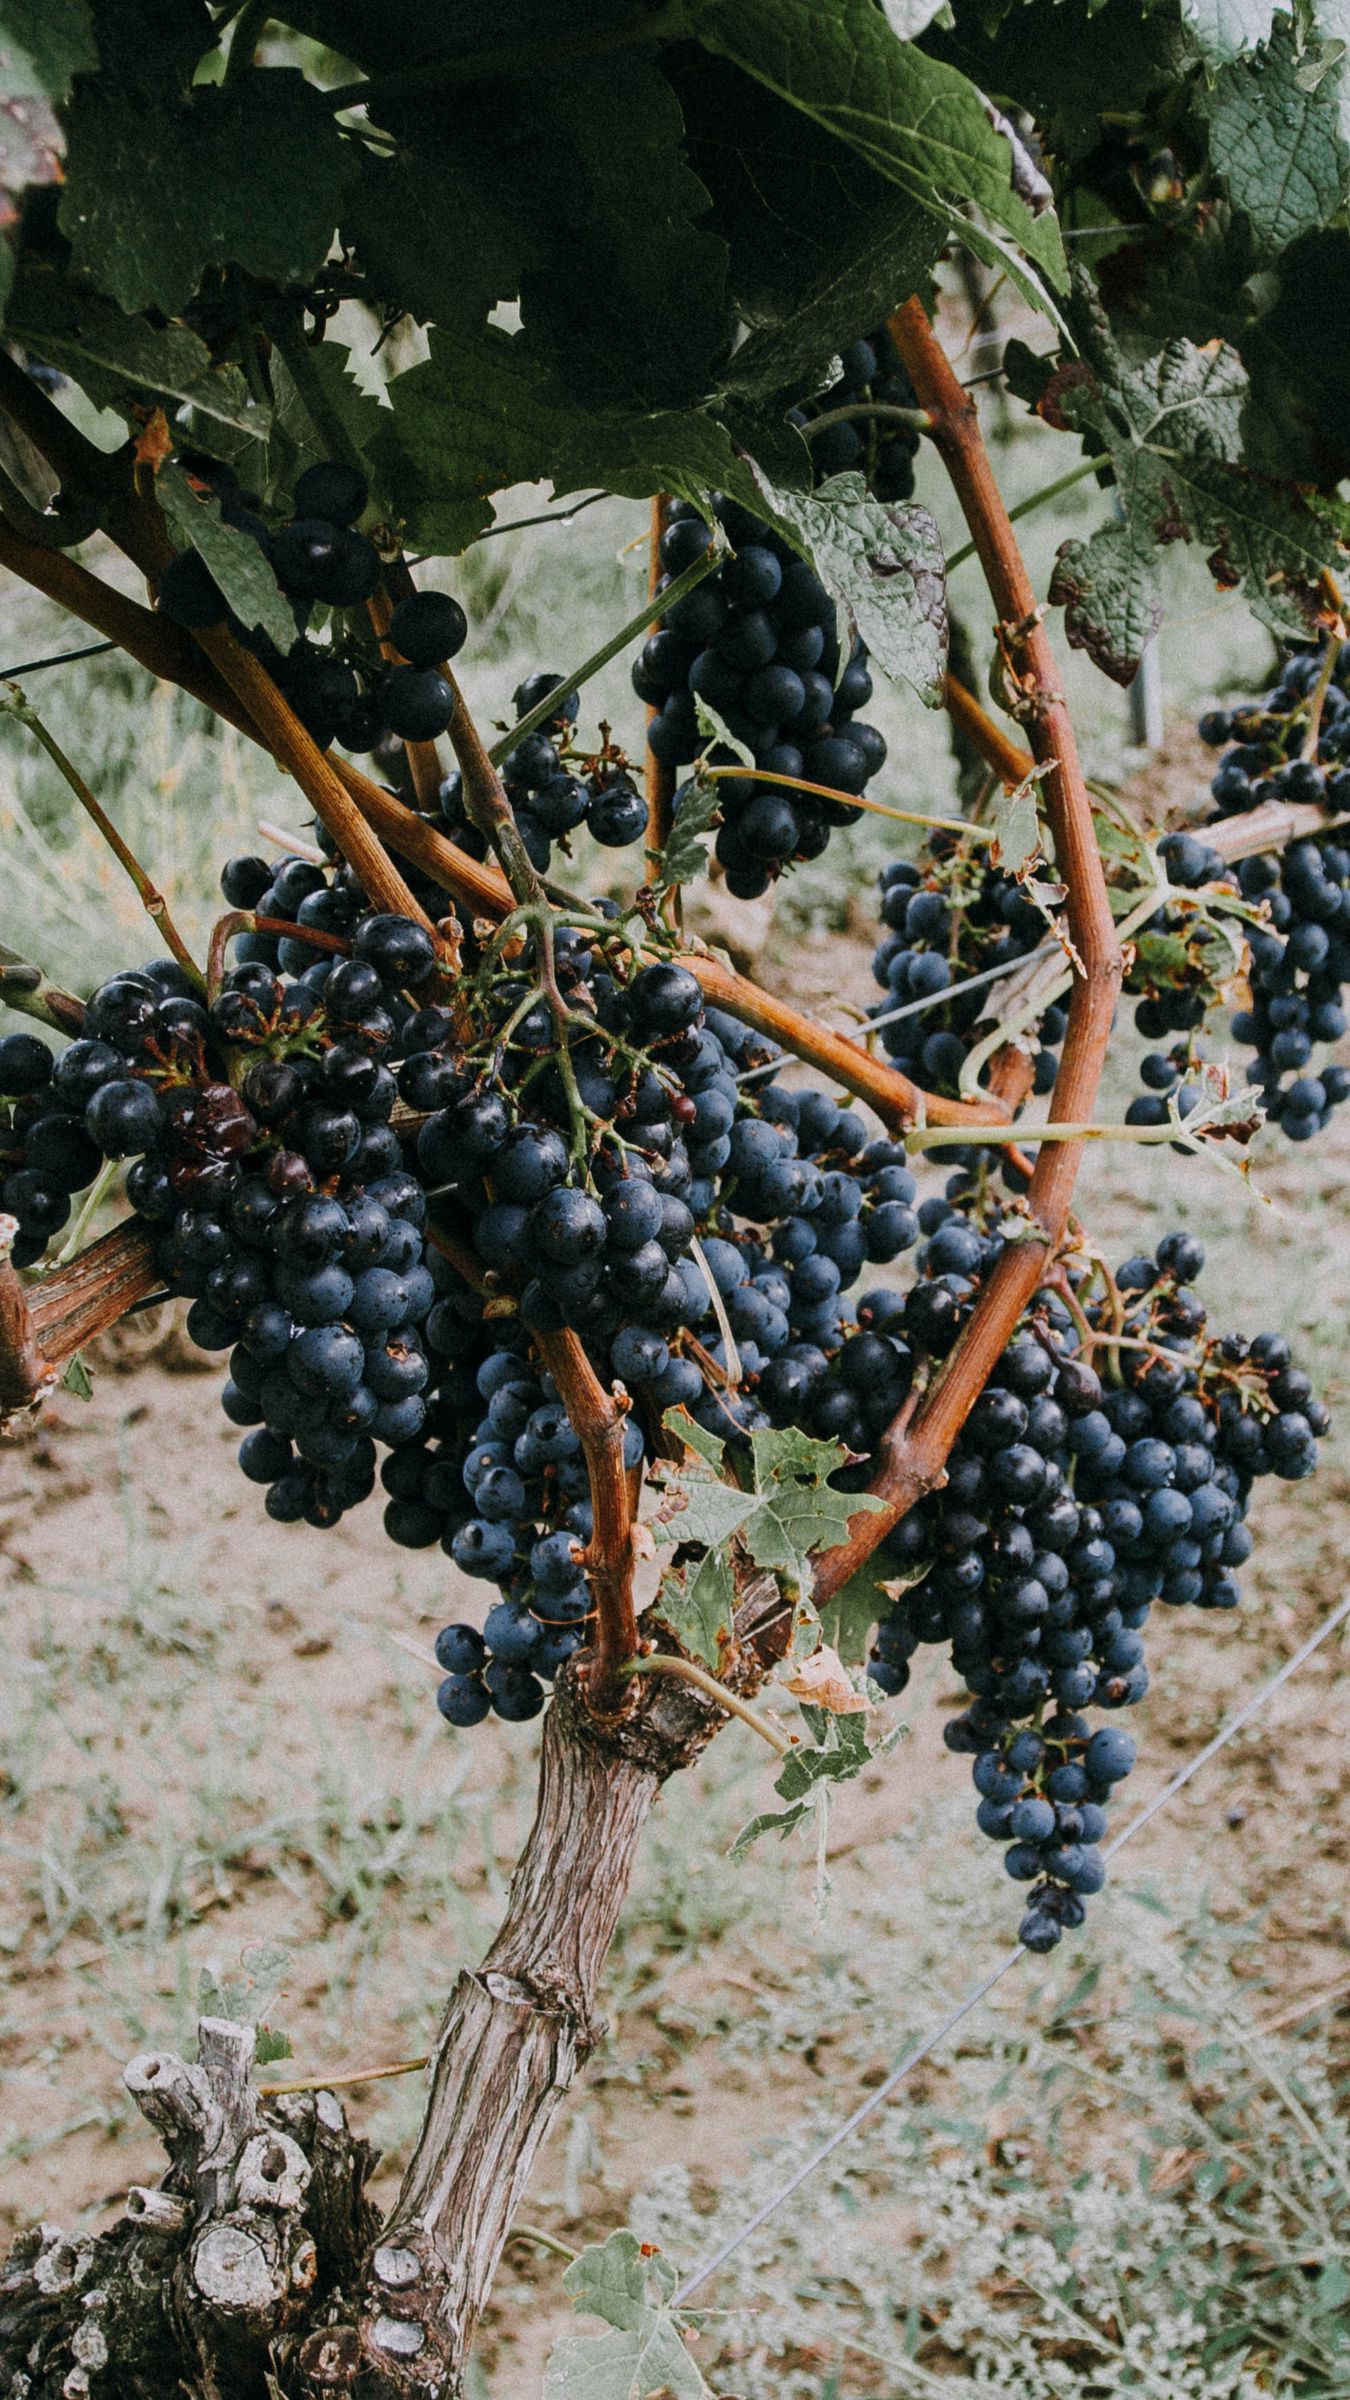 Download wallpaper 1350x2400 grapevine, grapes, berries iphone 8+/7+/6s+/for parallax HD background